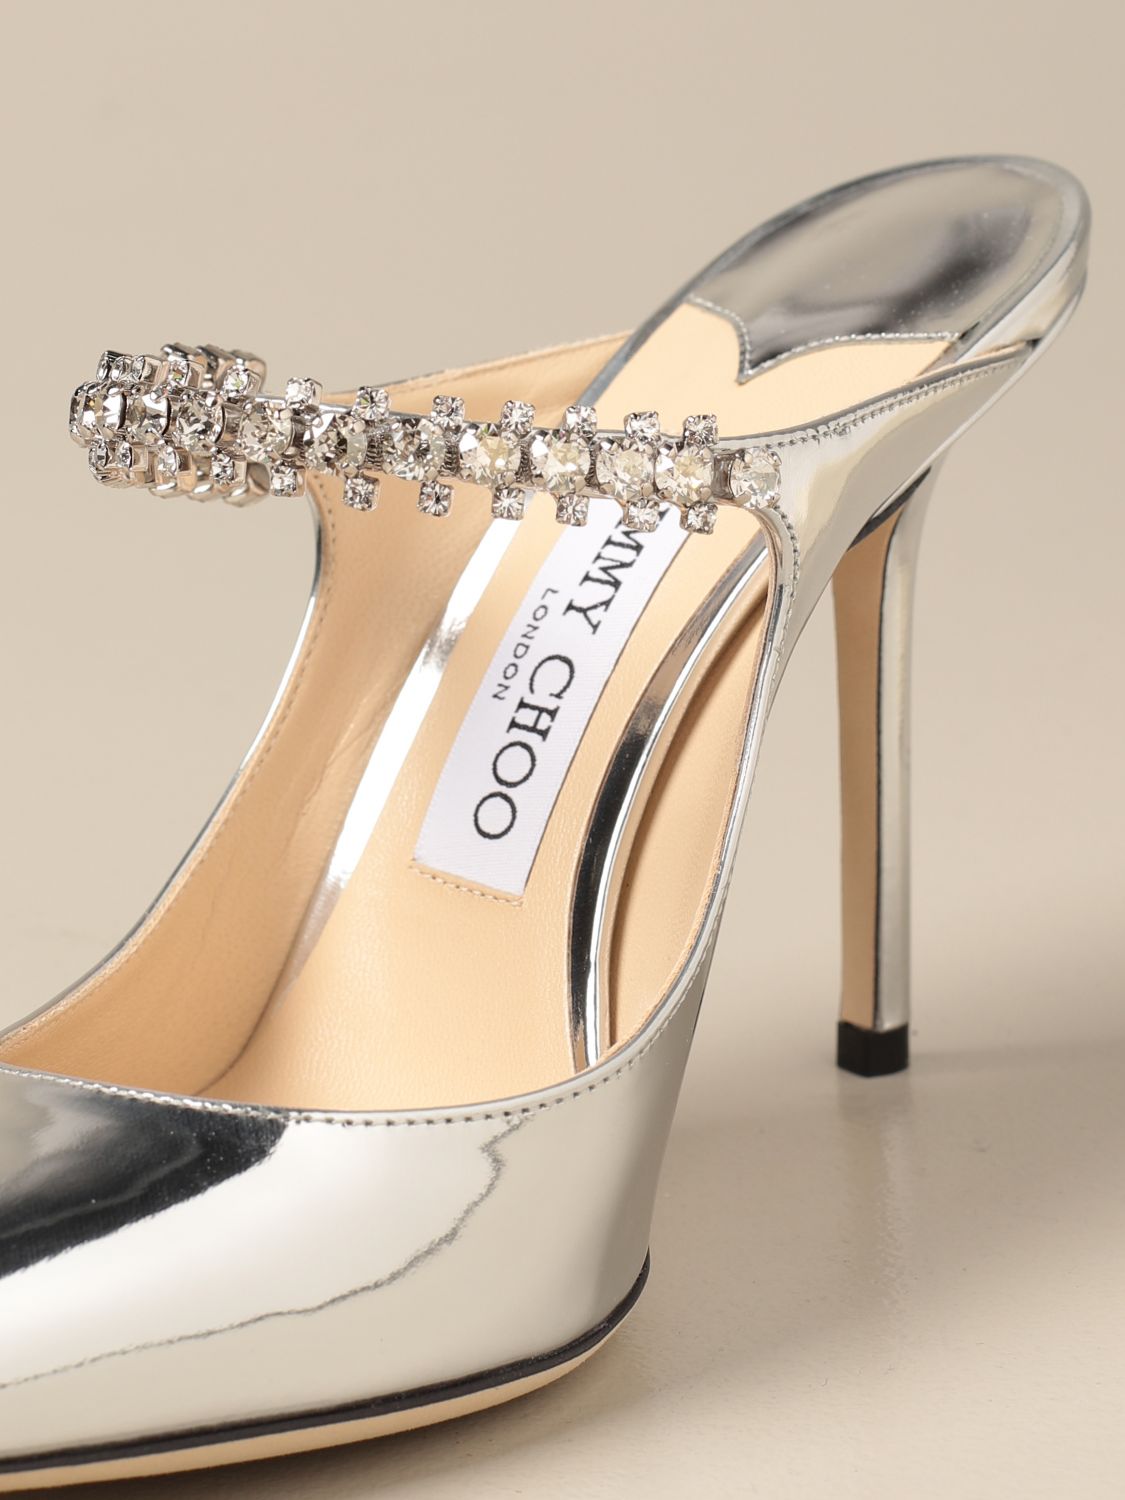 JIMMY CHOO: laminated leather with crystals | Pumps Jimmy Choo Women Silver | Pumps Jimmy Choo BING 100 QUI GIGLIO.COM